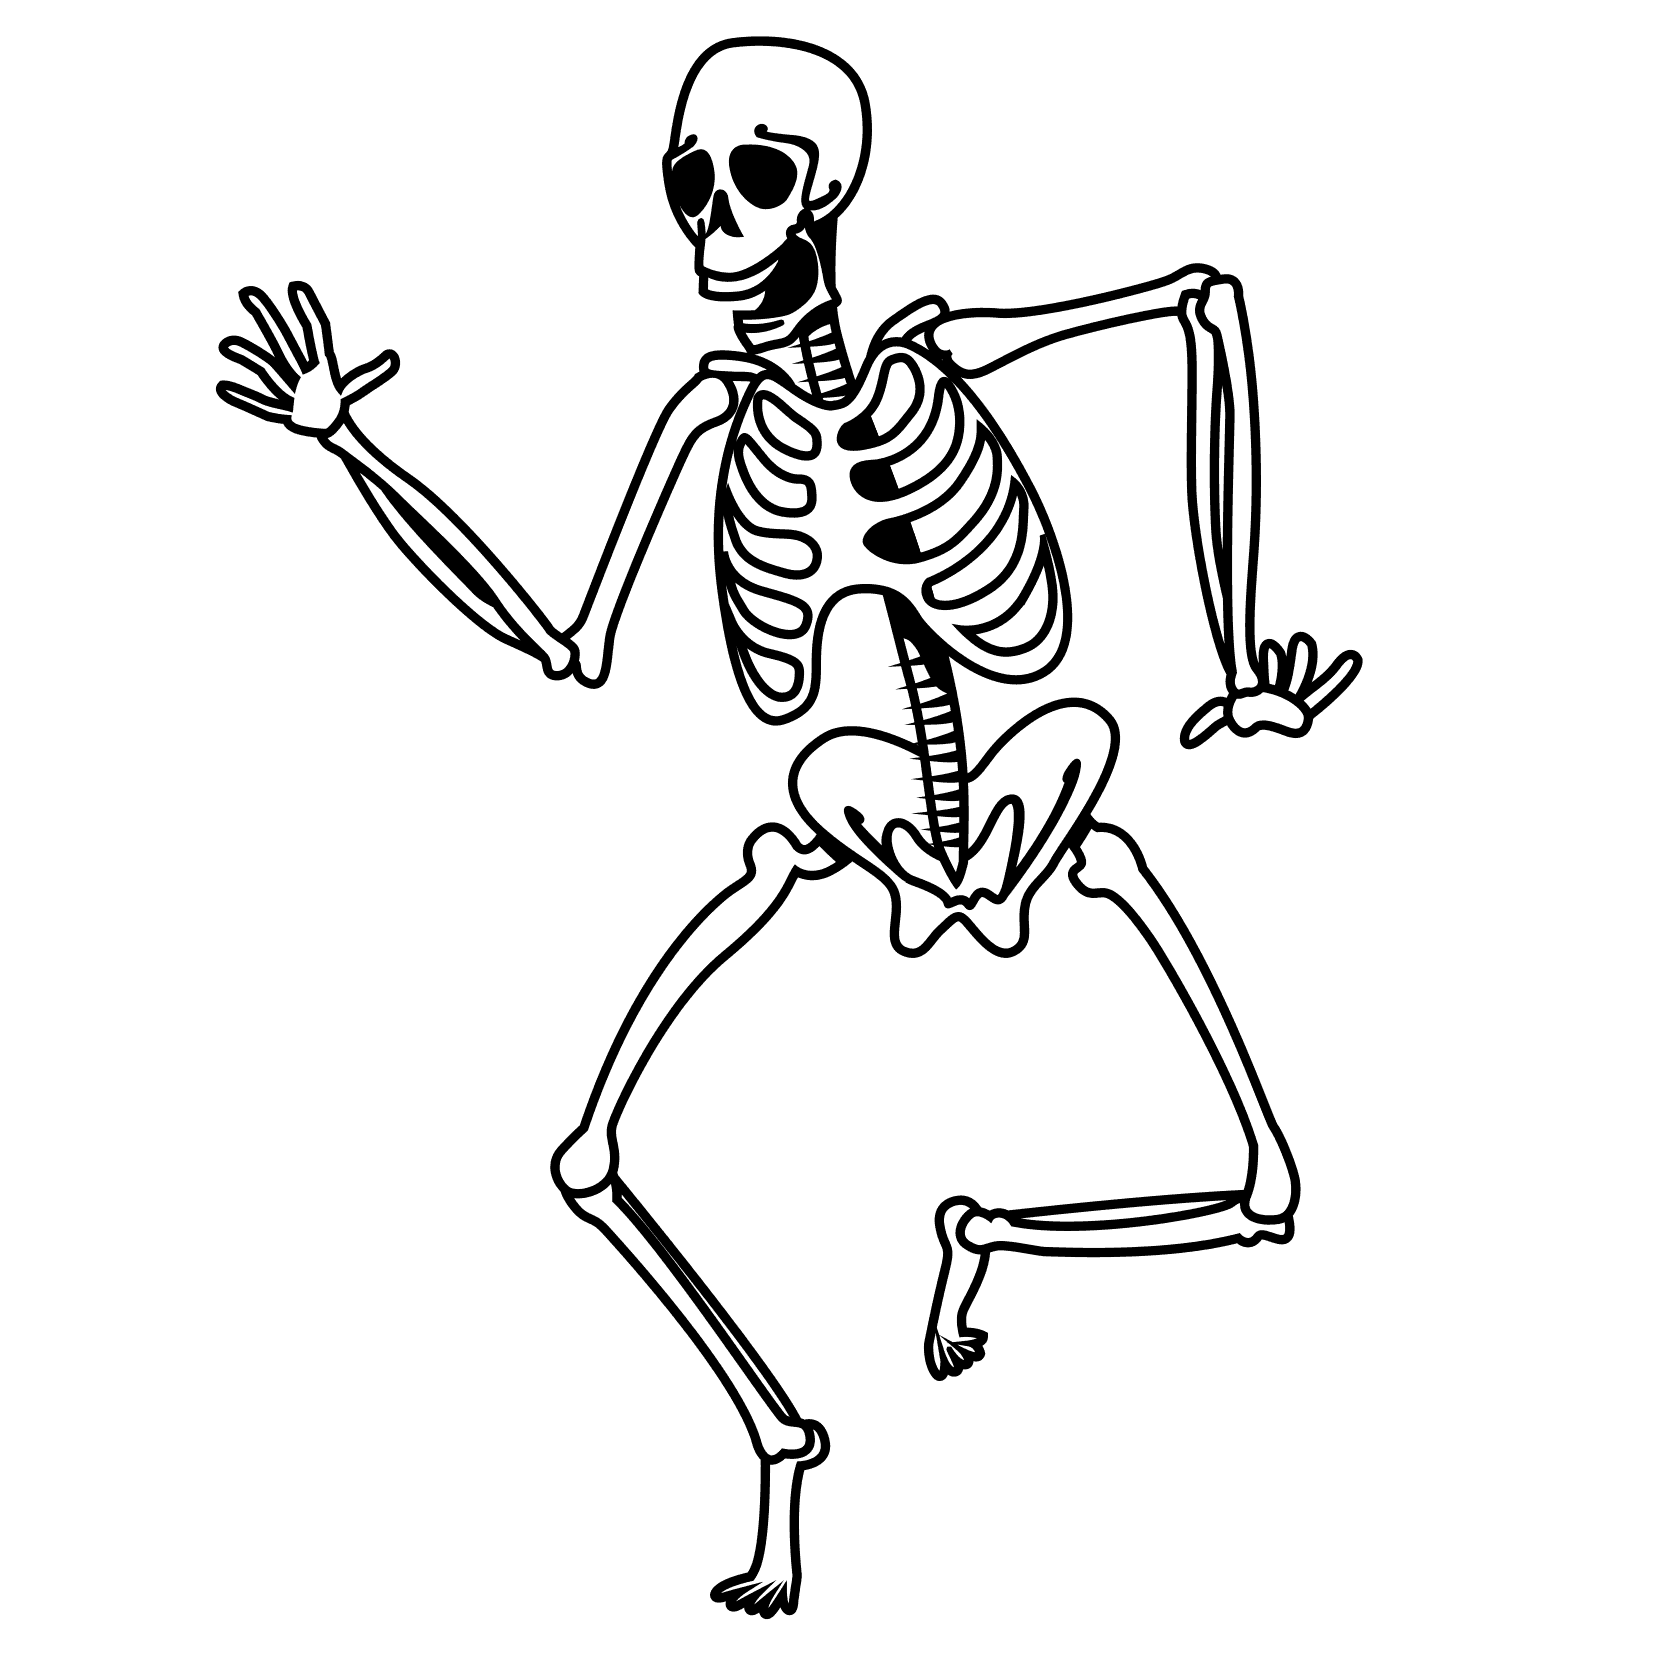 Halloween Skeleton Coloring Pages, skeleton colouring pages ...